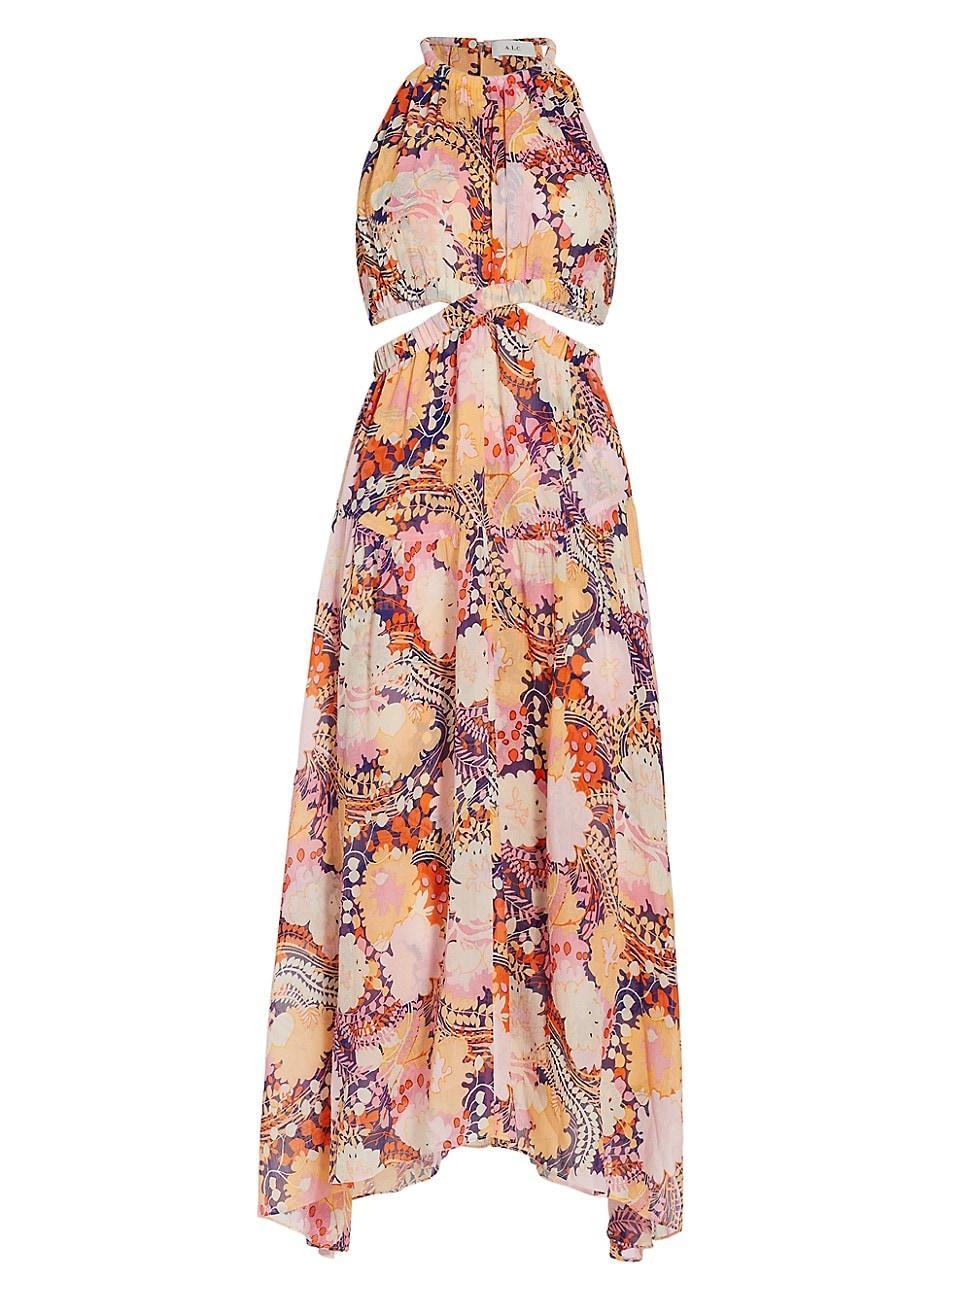 A.L.C. Waverly Dress in Pink. - size 2 (also in 0, 10, 12, 14, 4, 6, 8) Product Image